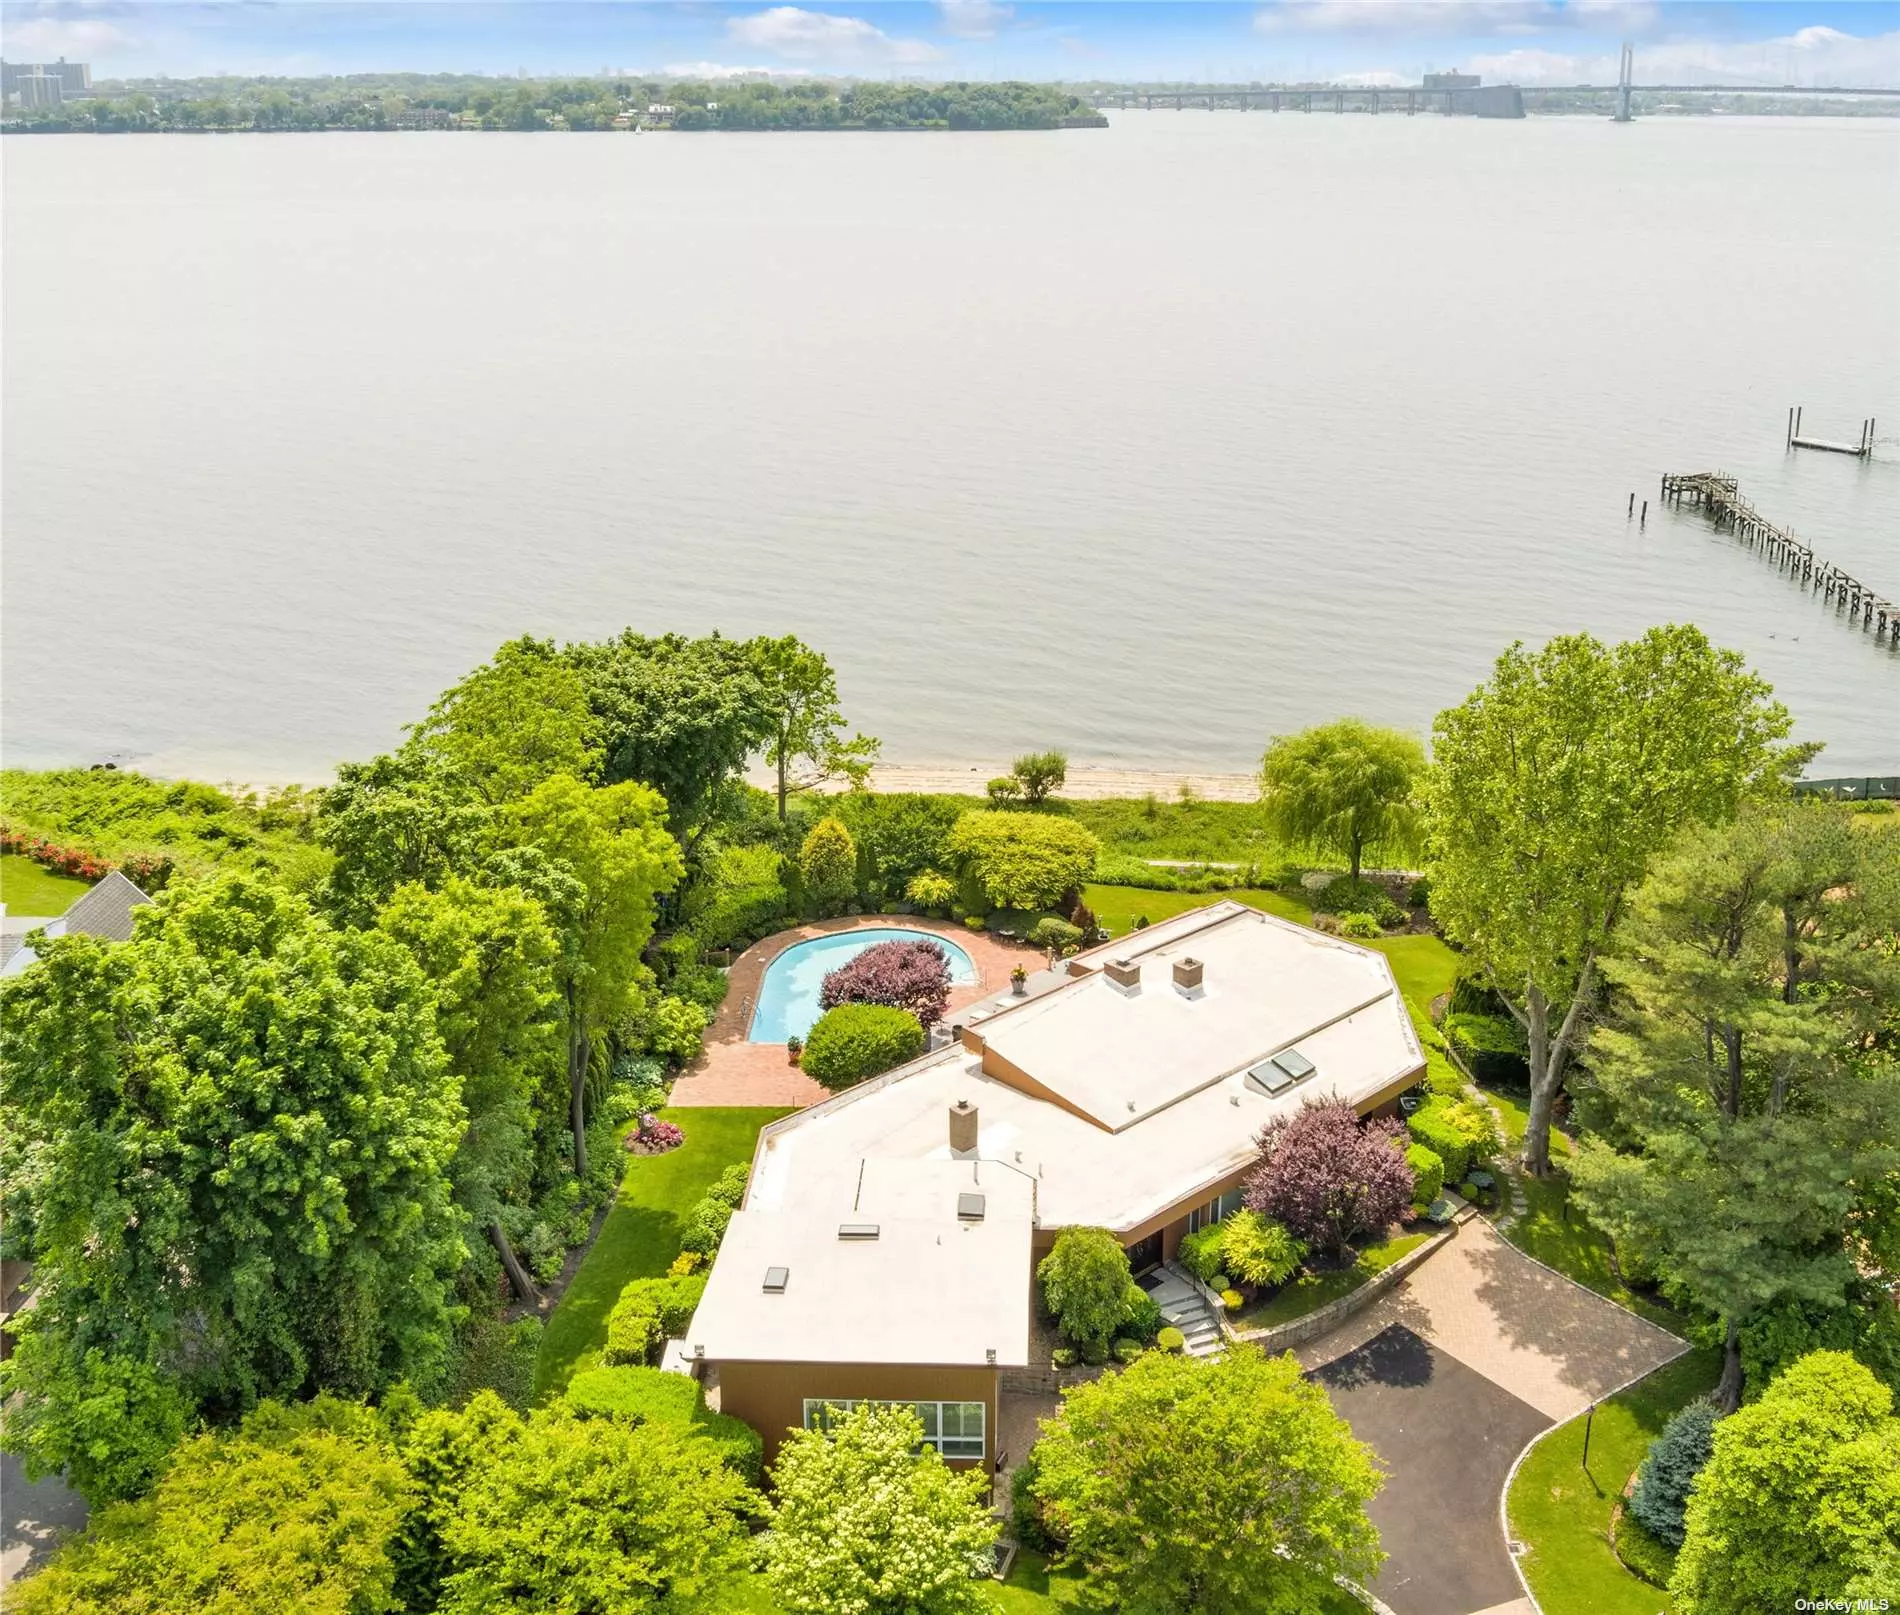 A true waterfront treasure in Great Neck, NY. Village of Kings Point. This stunning direct waterfront property with western views overlooks two bridges and the Manhattan Skyline. The very large 1.32 acre property sits up high with refurbished bulkhead and a beautiful sparkling swimming pool surrounded by patio and deck. Very inviting outdoor entertaining spaces and direct access to the water with private beach for residents only. Enjoy the very best this location has to offer. Inside features spacious open concept rooms, expansive windows and lots of natural light. The Living Room with fireplace, dining room and den all have soaring high ceilings and incredible views. The bridges look like diamond necklaces at night and New York City shines. An eat-in-kitchen, separate Study and Piano Room round out the first floor. Full house generator installed and natural gas. New driveway and belgian block apron. Gorgeous landscaping throughout, colorful gardens, scenic vistas and an absolute gem of a property. Live your dream here.